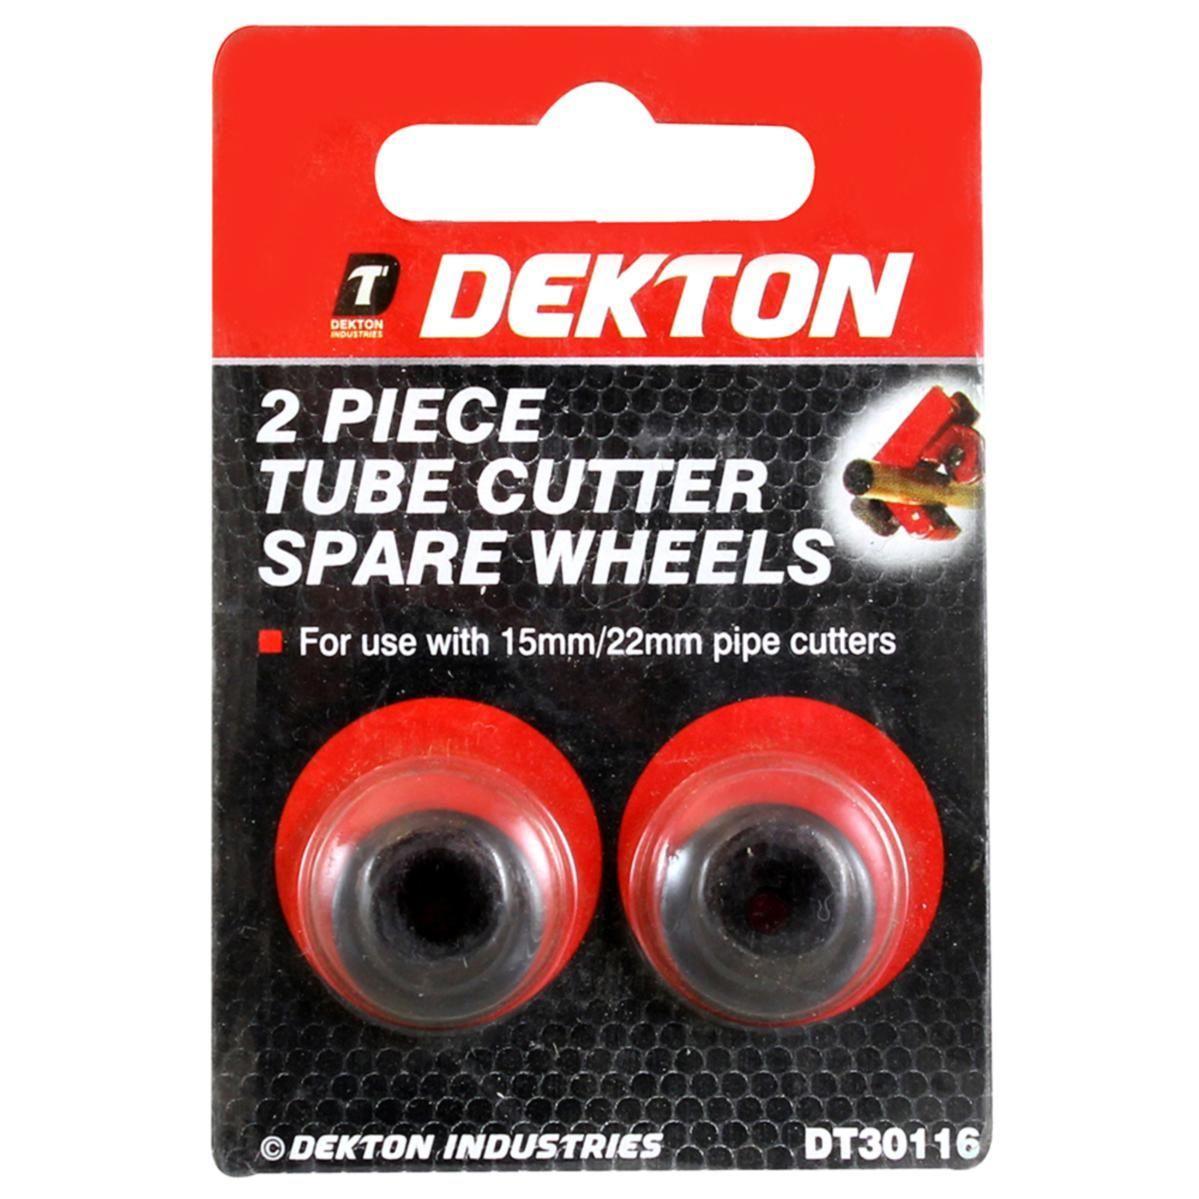 Dekton Pipe Slicer Replacement Blades 2 Pieces DT30116 - Choice Stores